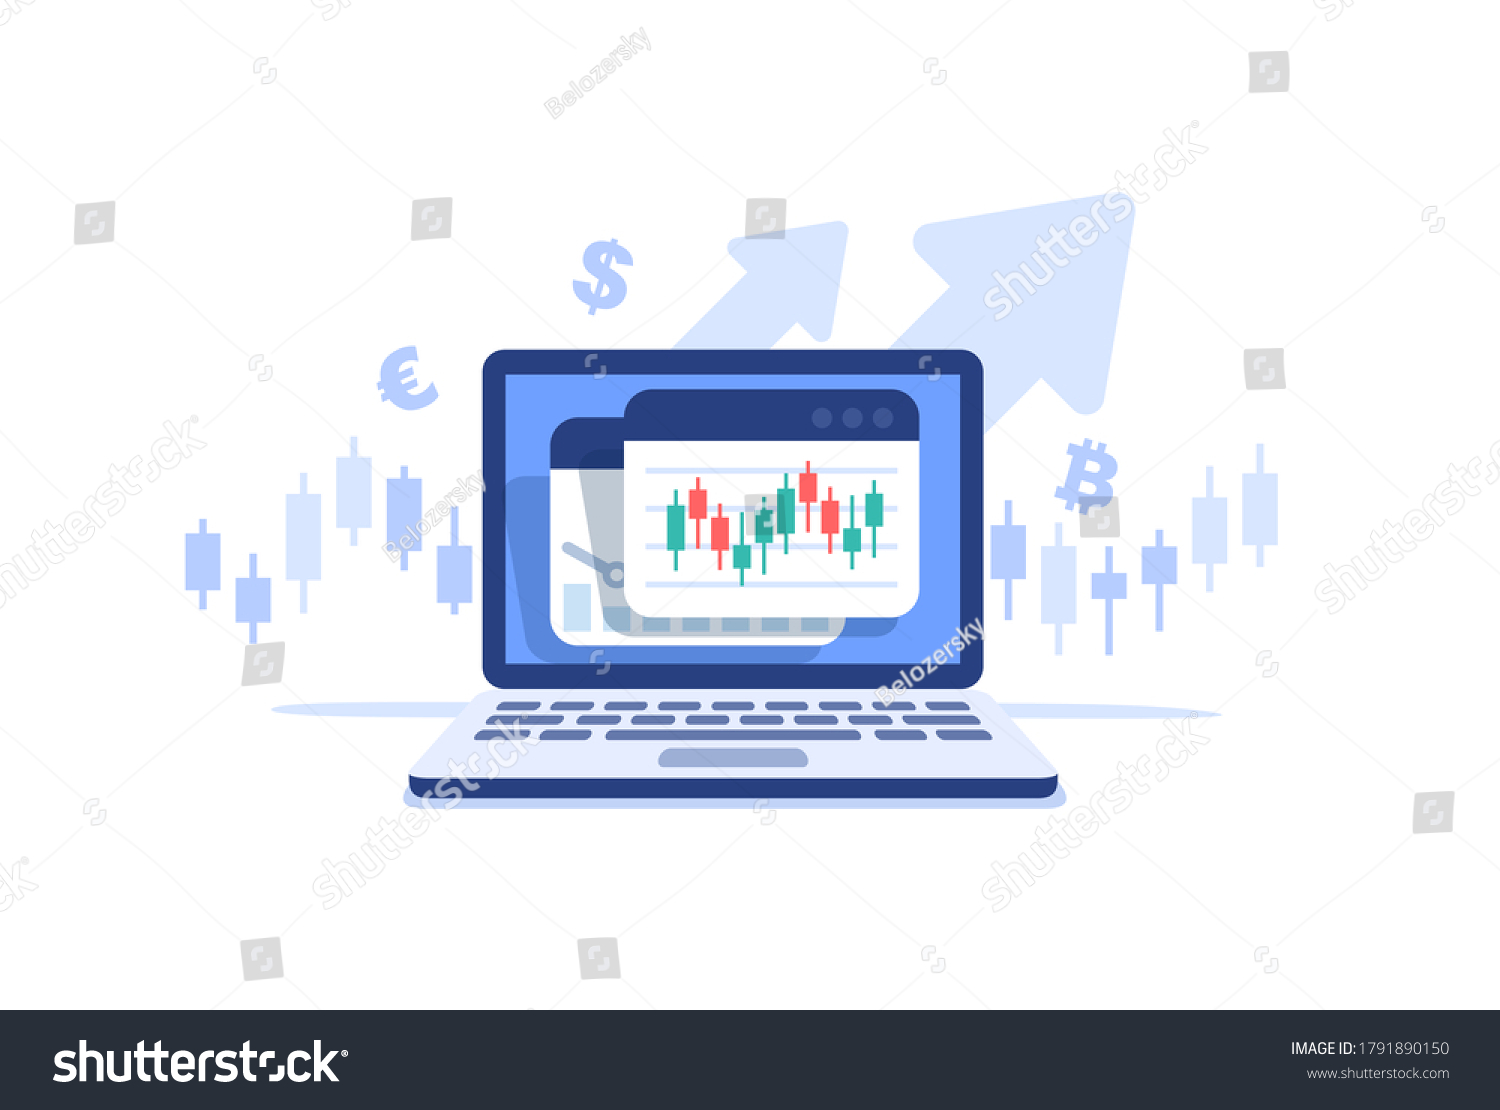 SVG of Stocks market graph chart on laptop screen. Technical analysis candlestick chart. Global stock exchanges index. Forex trading concept. Trading strategy. Vector illustration in flat style. svg